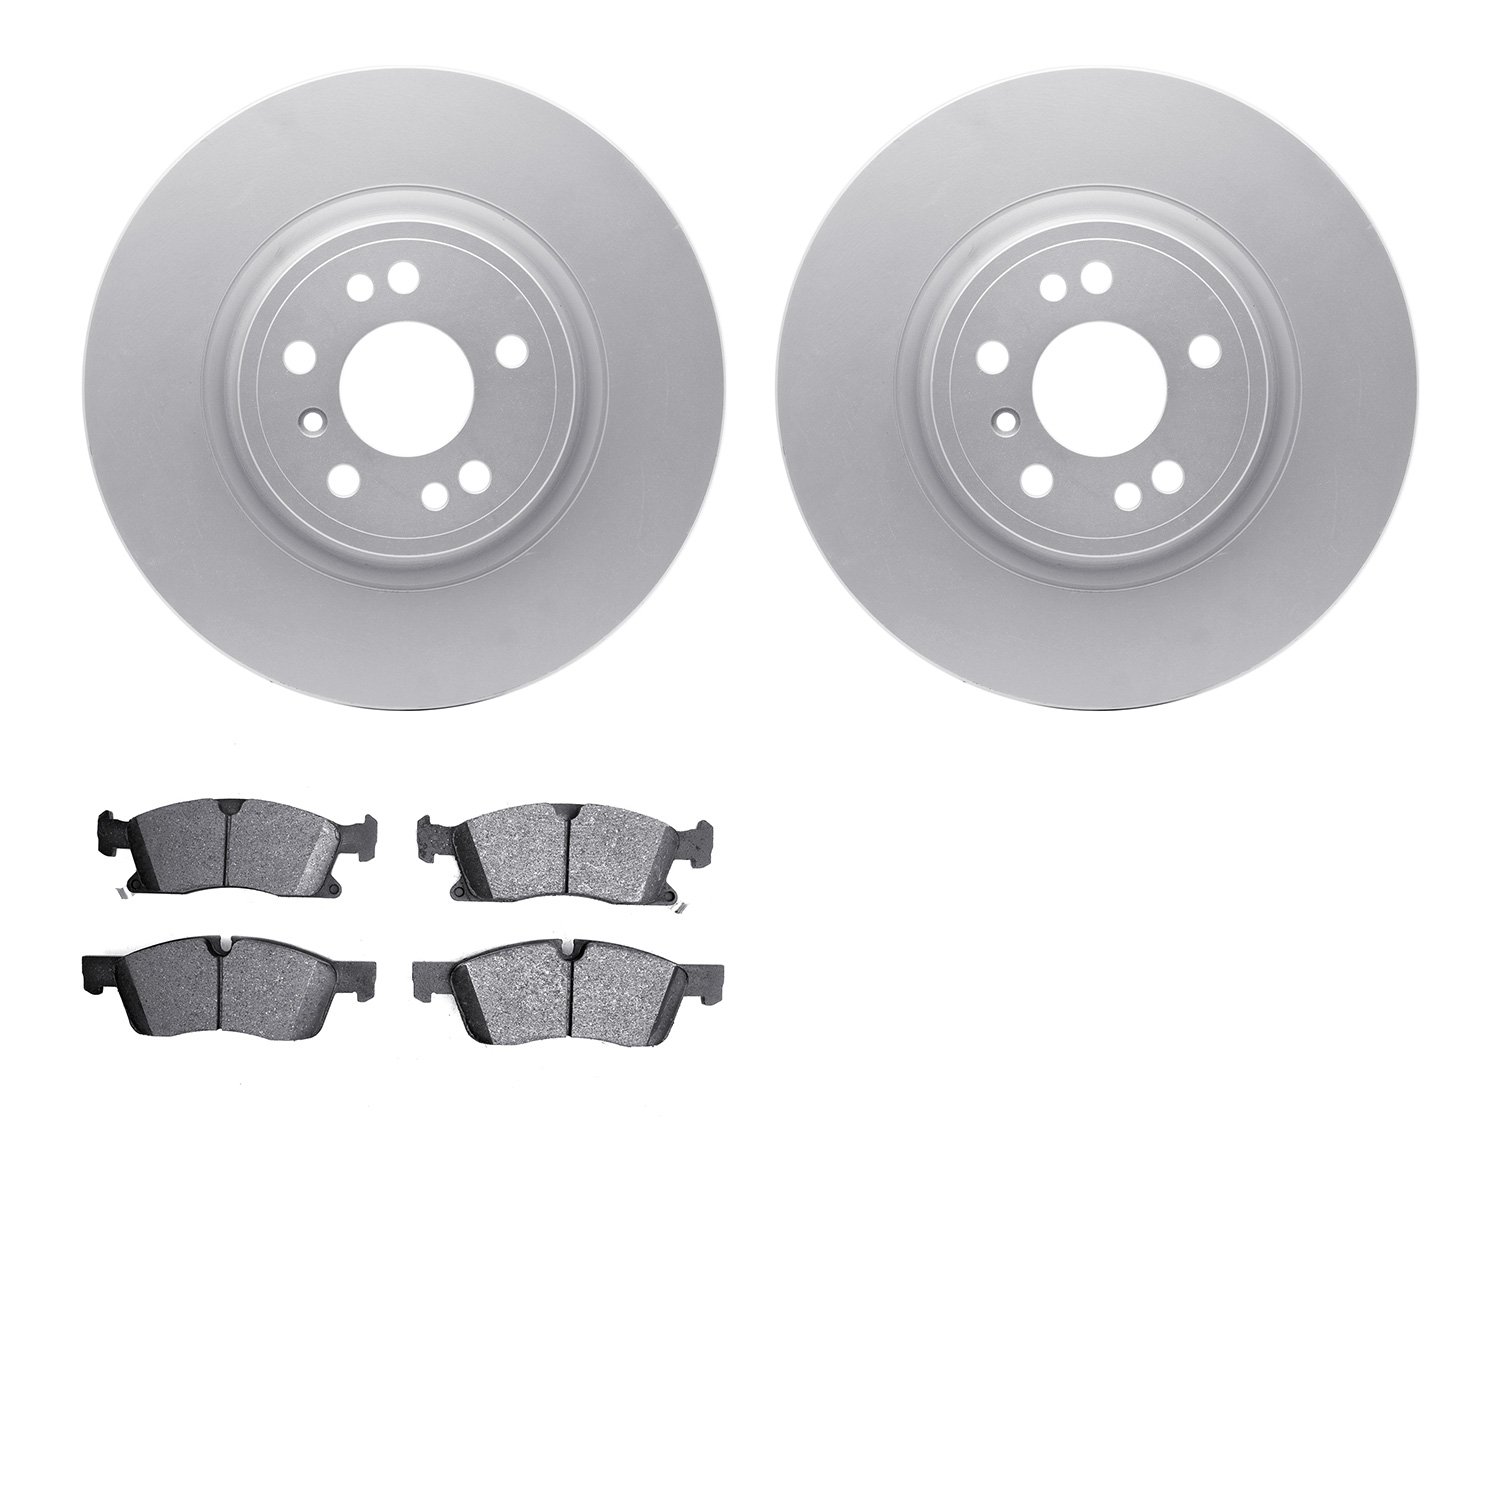 4402-63001 Geospec Brake Rotors with Ultimate-Duty Brake Pads Kit, 2012-2018 Mercedes-Benz, Position: Front